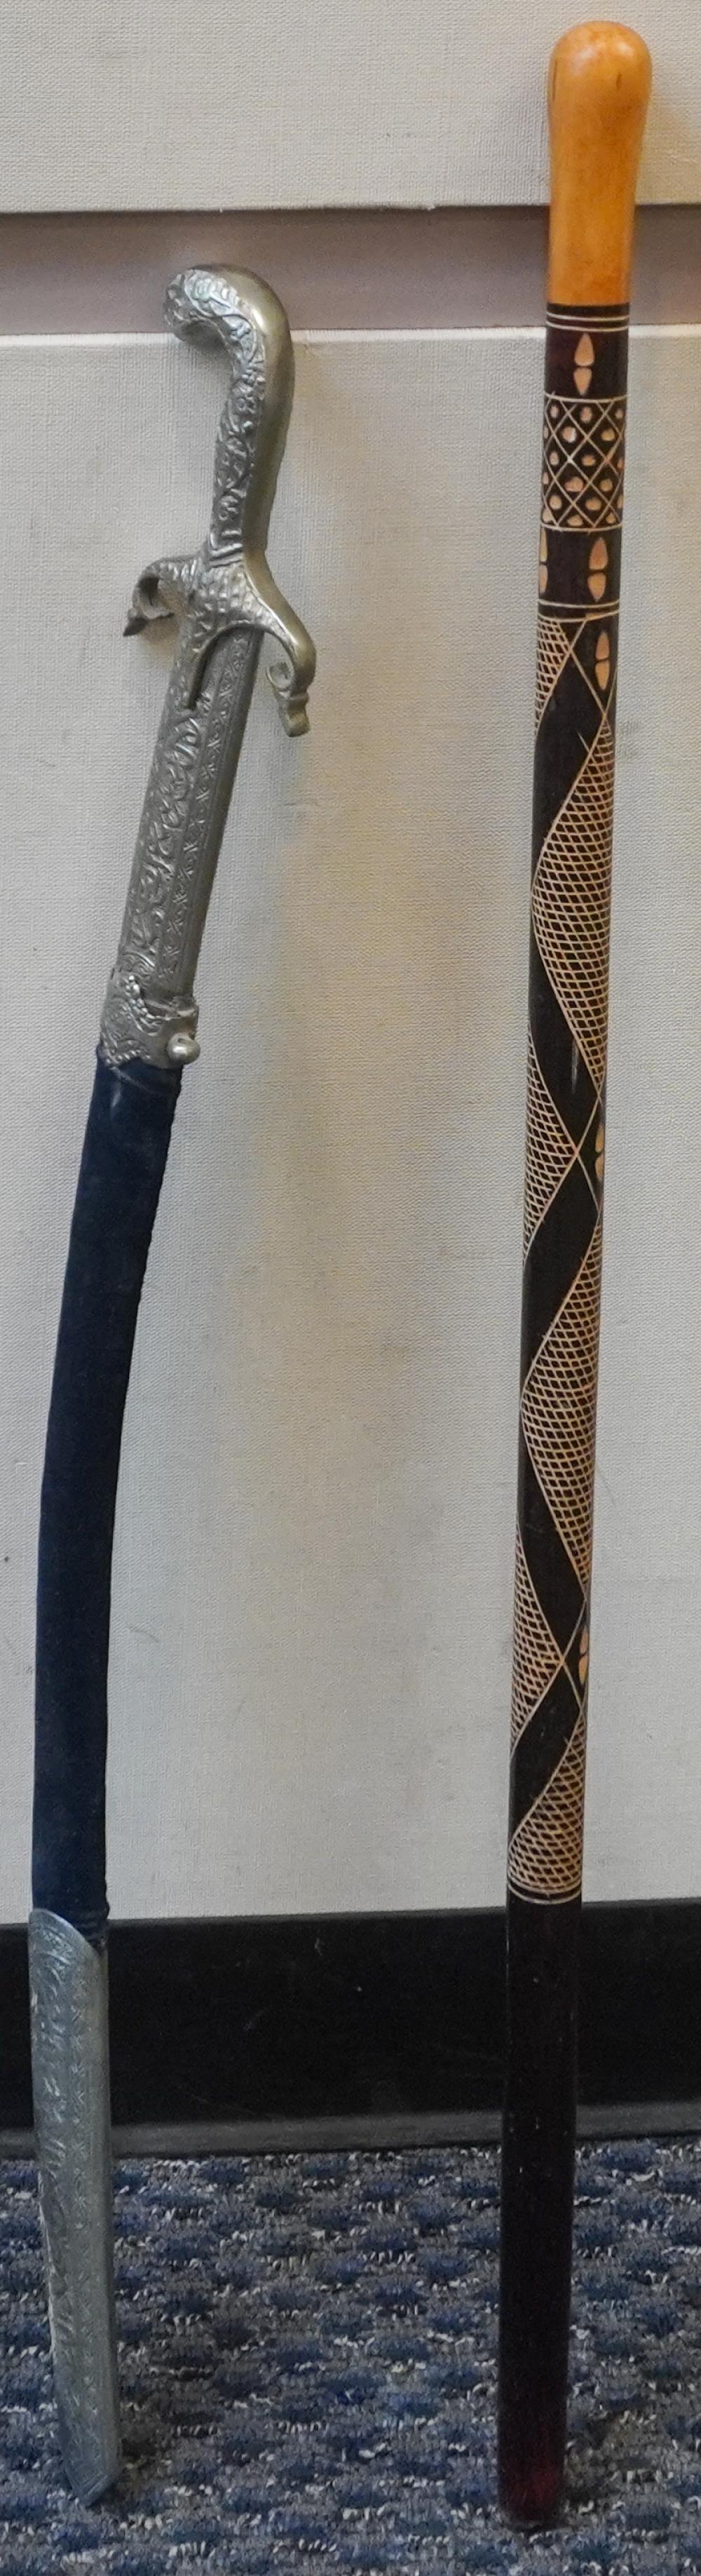 AFRICAN CARVED WOOD CANE AND A 2e66bf